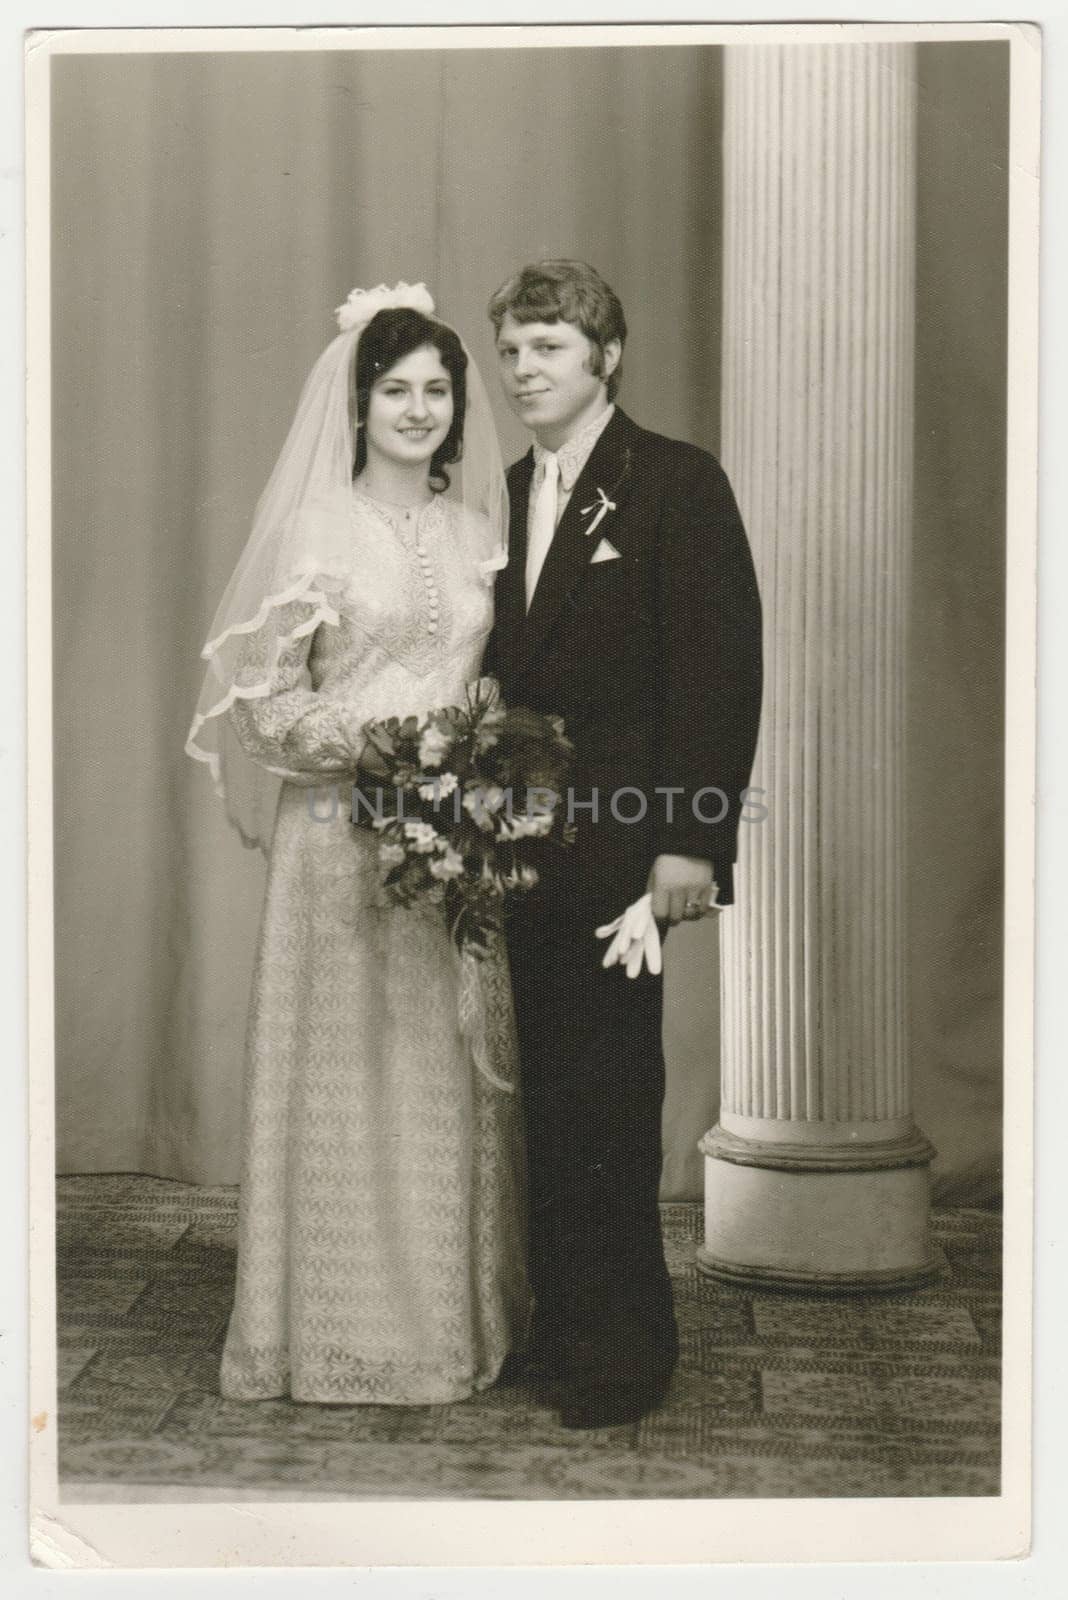 Vintage photo shows a bride with bridegroom. Bride wears a soft veil and holds wedding flowers - bouquet. Retro black and white photography. Circa 1980. by roman_nerud